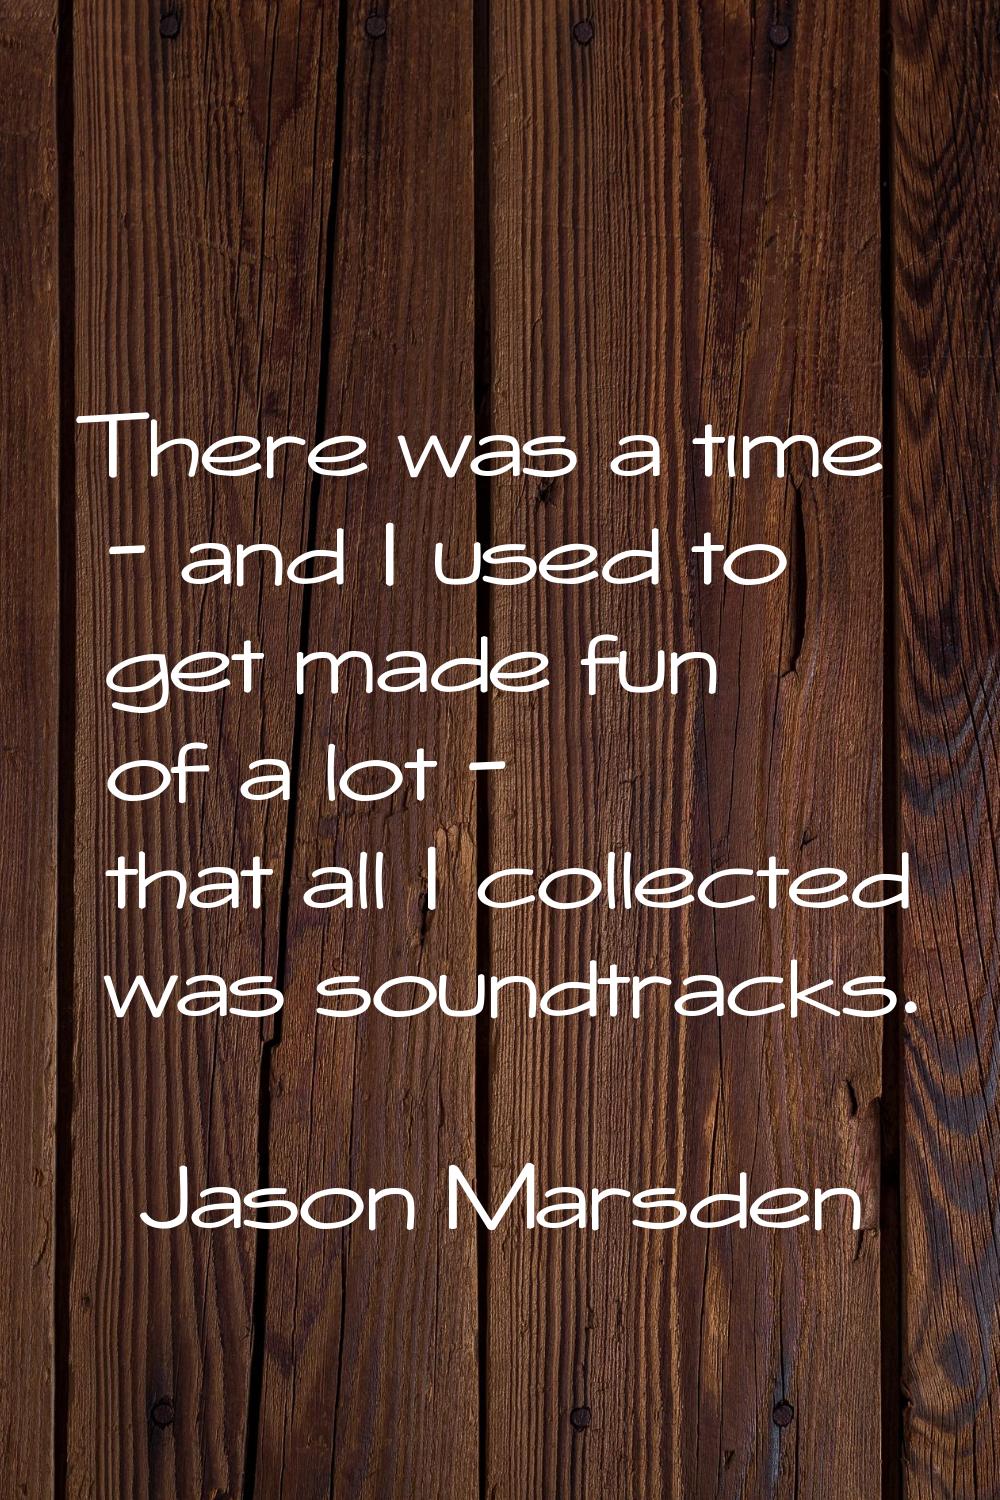 There was a time - and I used to get made fun of a lot - that all I collected was soundtracks.